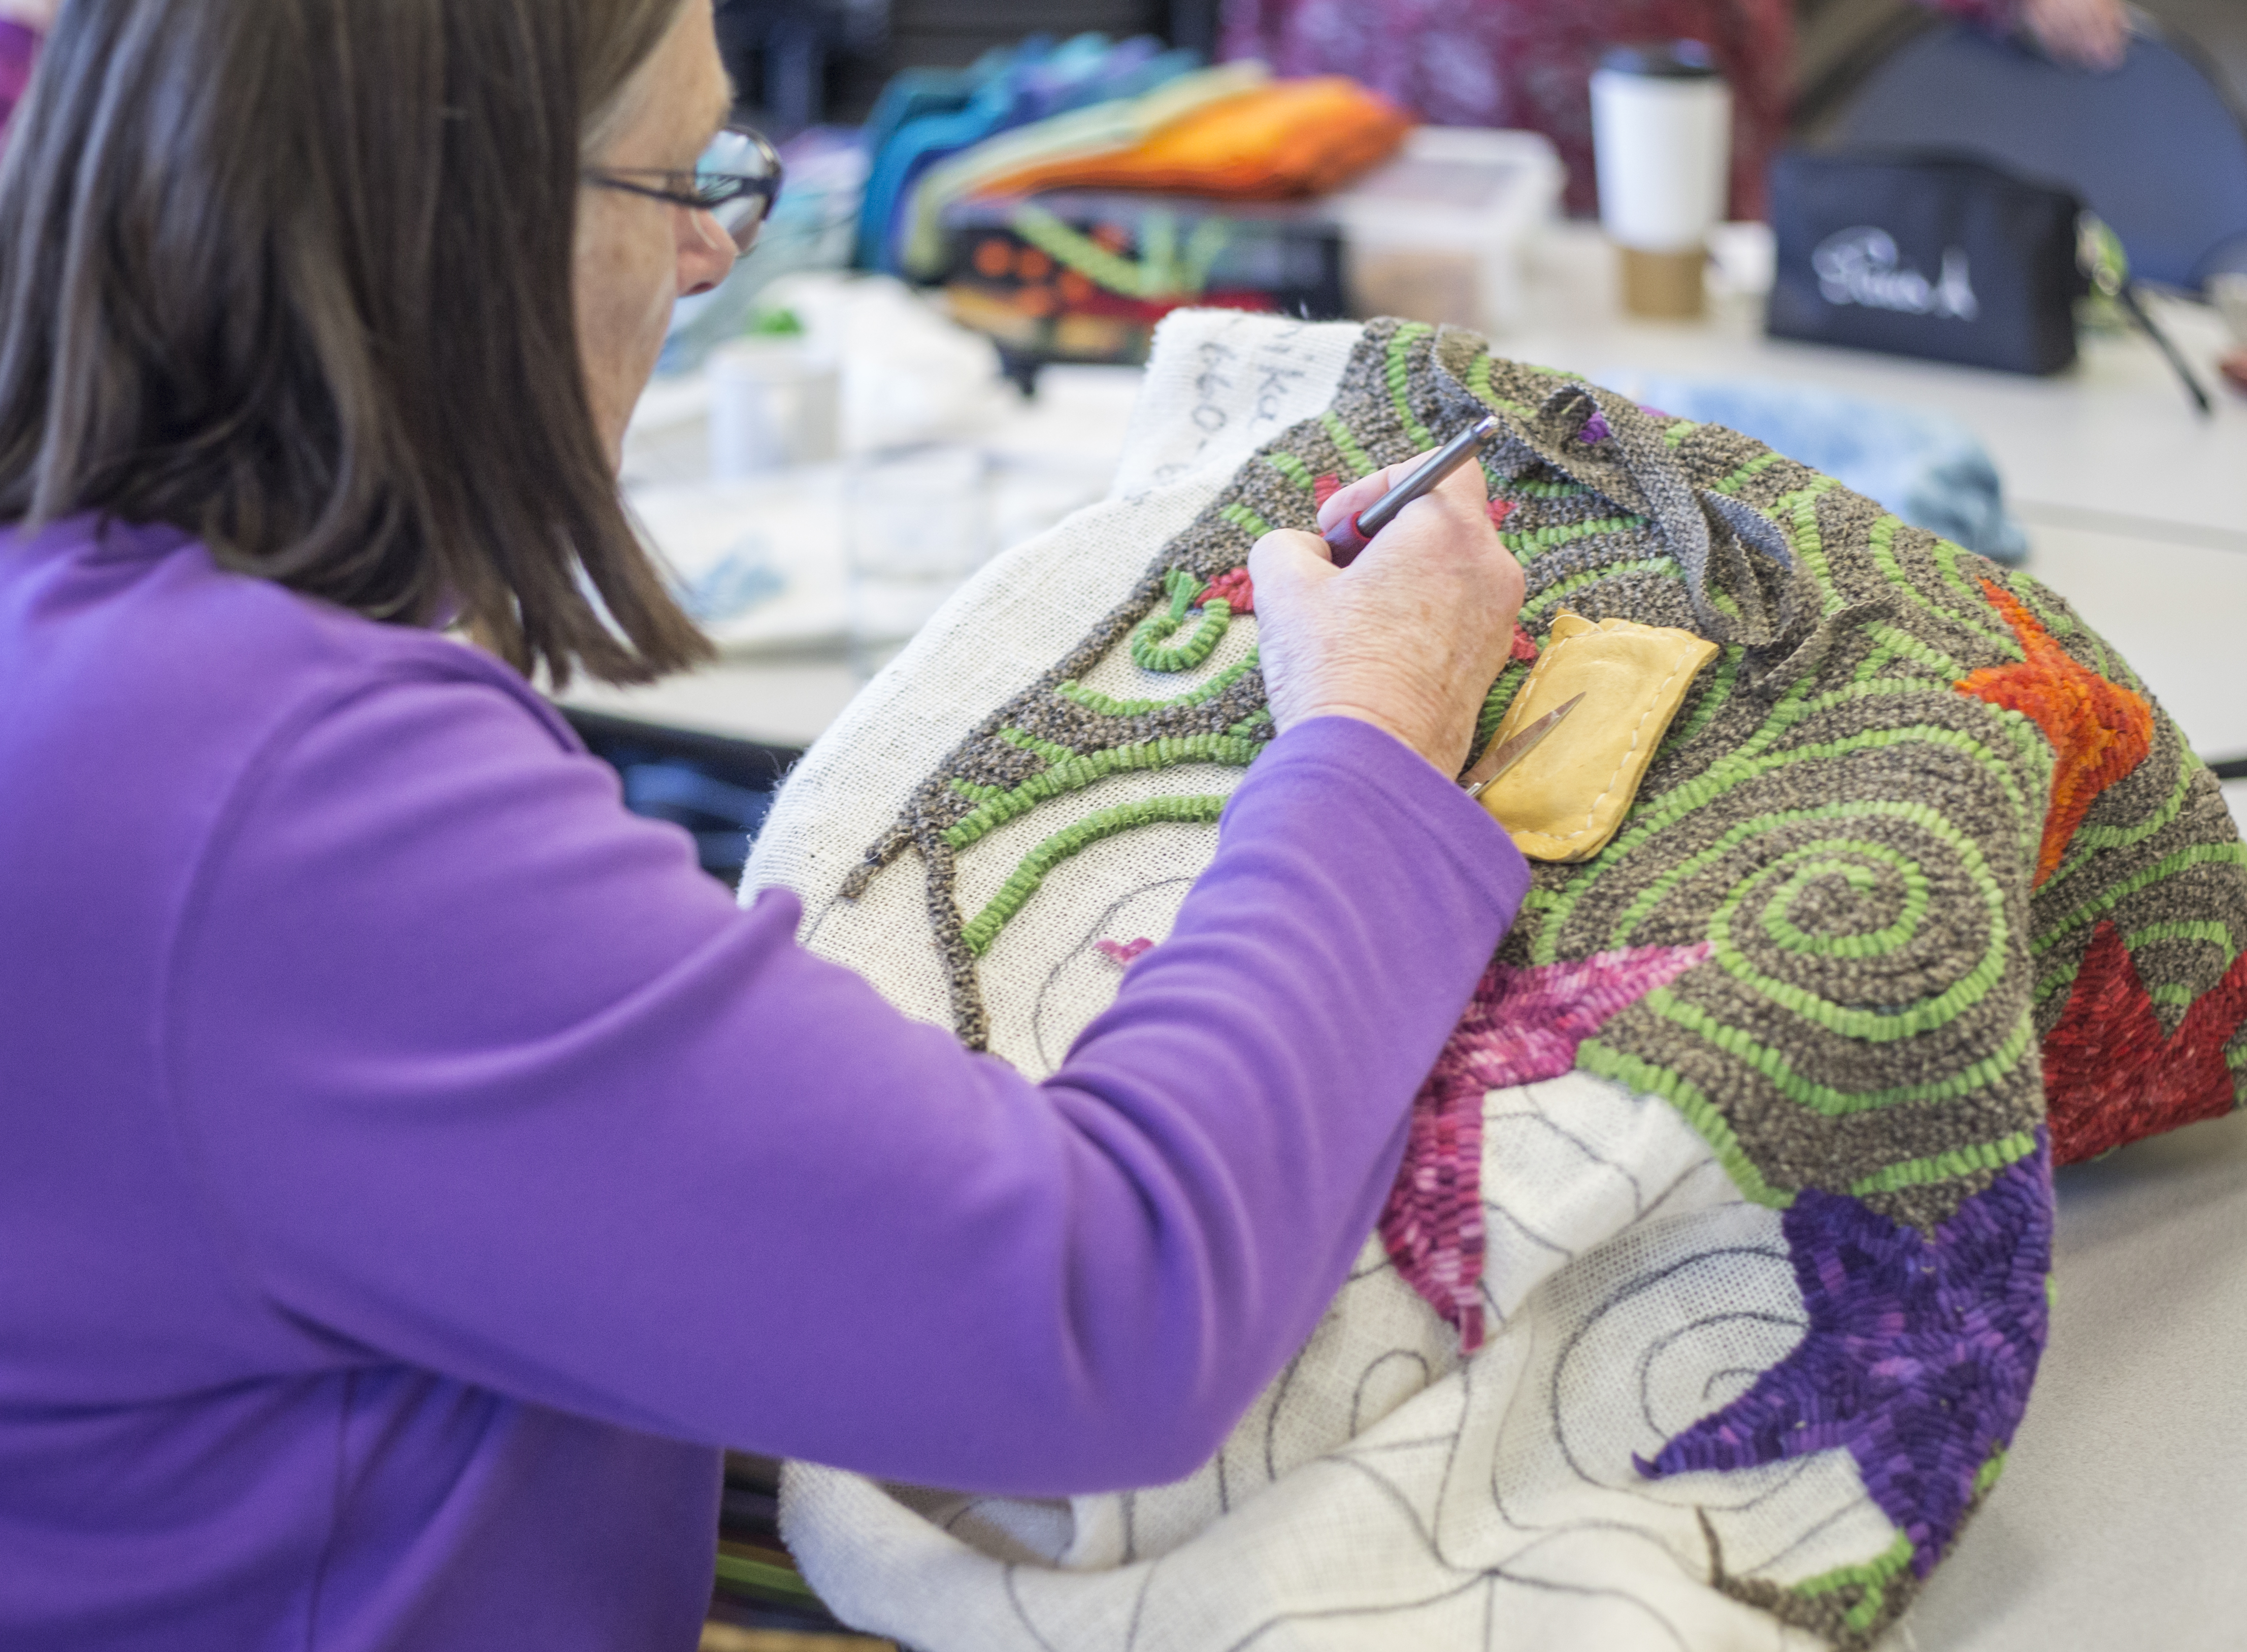 A woman embroiders at the Social activity at Bend Senior Center.